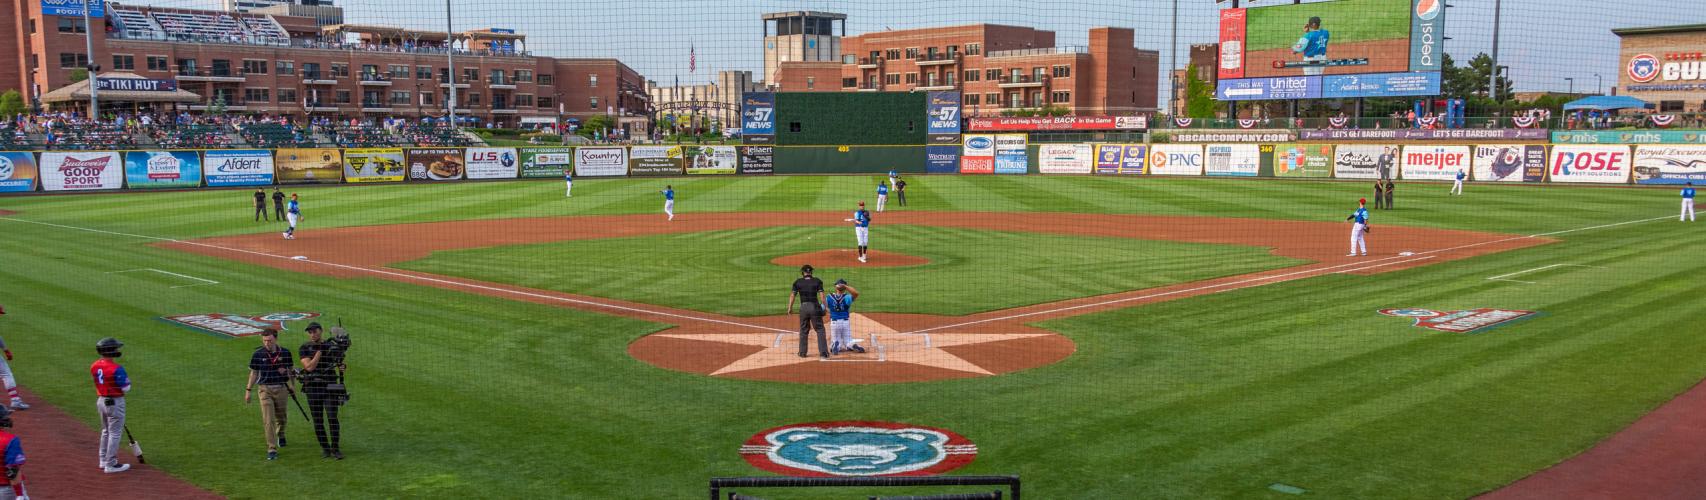 South Bend Cubs Baseball Family Fun and Promotions